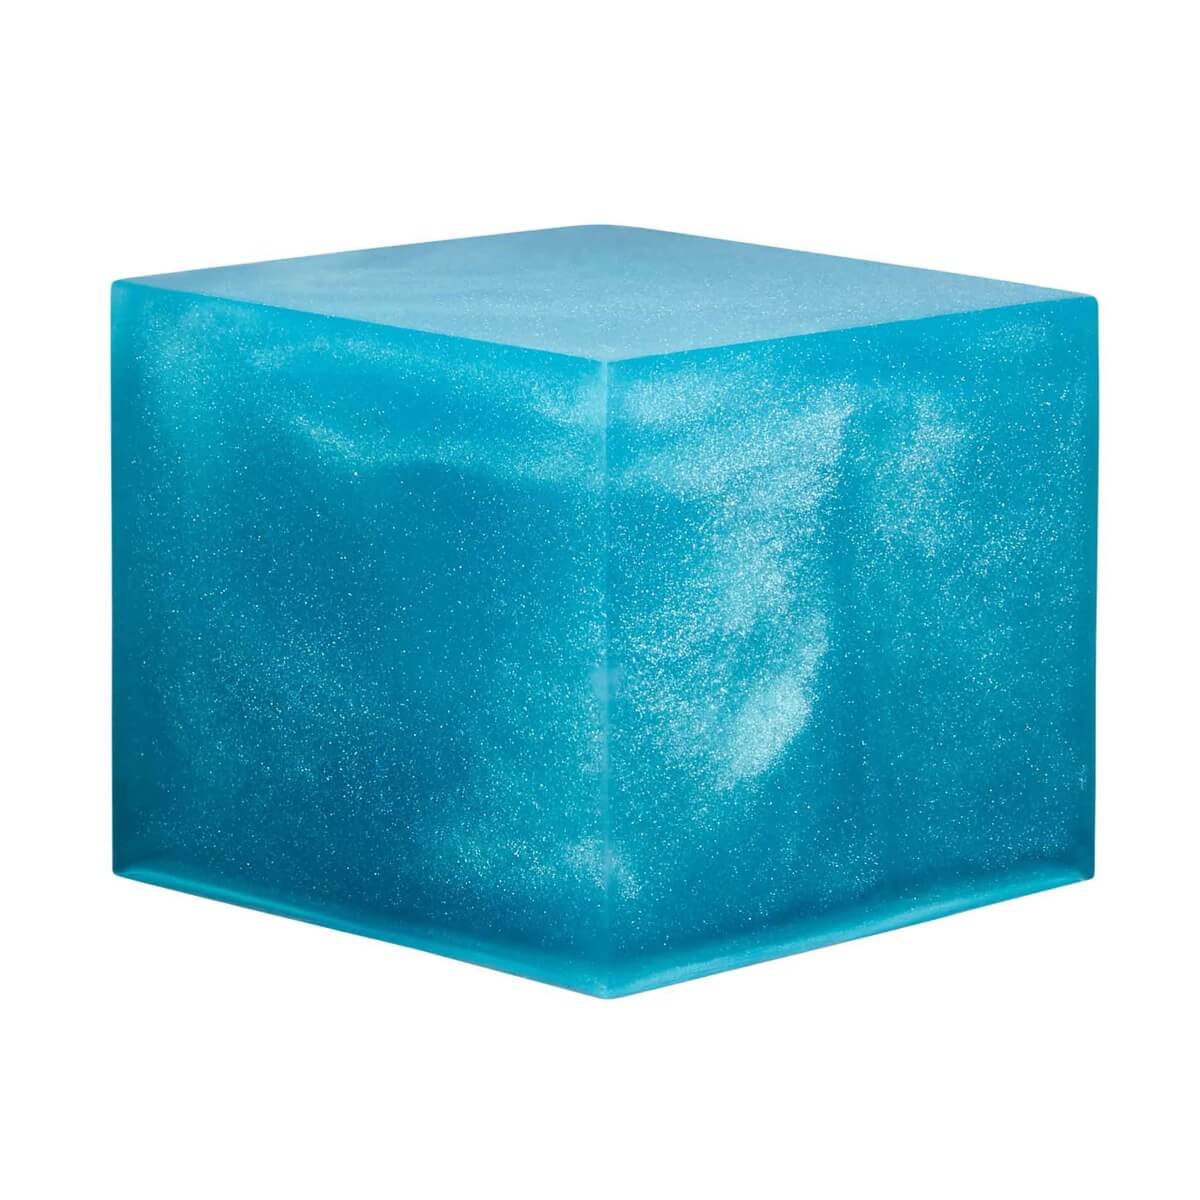 A resin cube made with the Greek Turquoise Pearl Mica Powder Pigment by Pigmently.